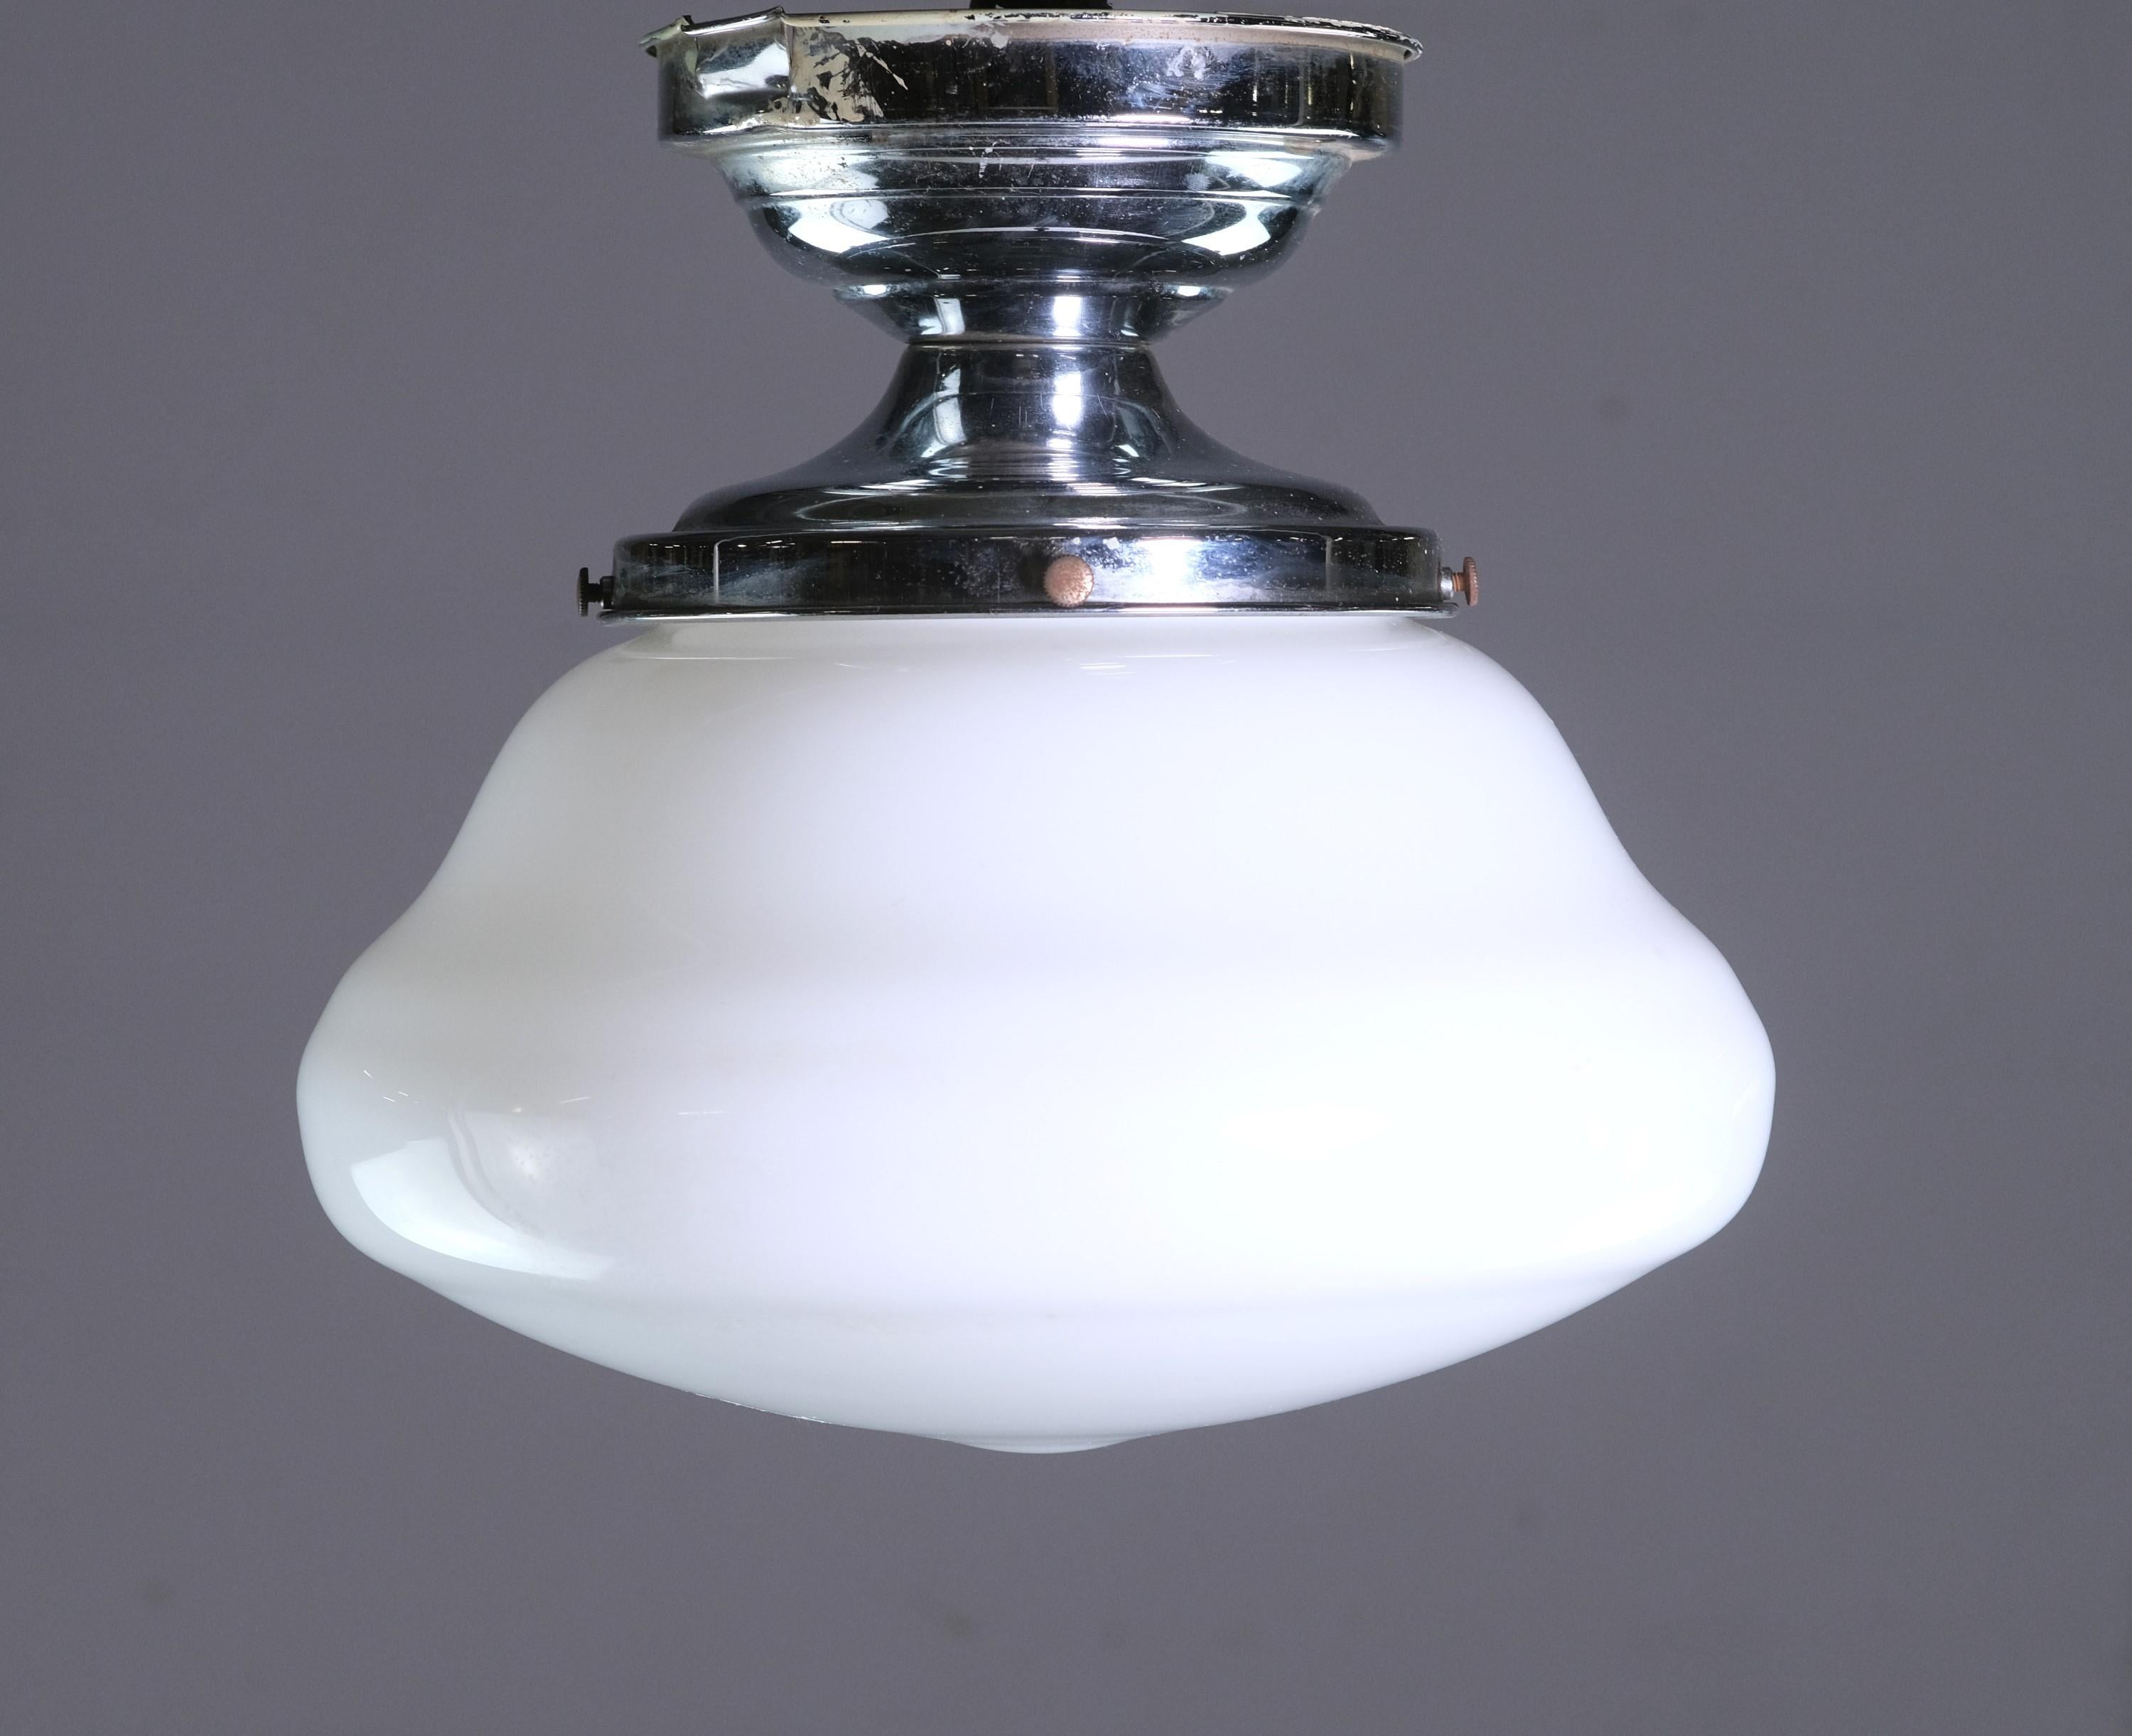 Quantity available. Early 20th century schoolhouse style light. Featuring original white shake with new nickel plated hardware. Semi flush mount design. Cleaned and rewired. Small quantity available at time of posting. Priced each. Please note, this